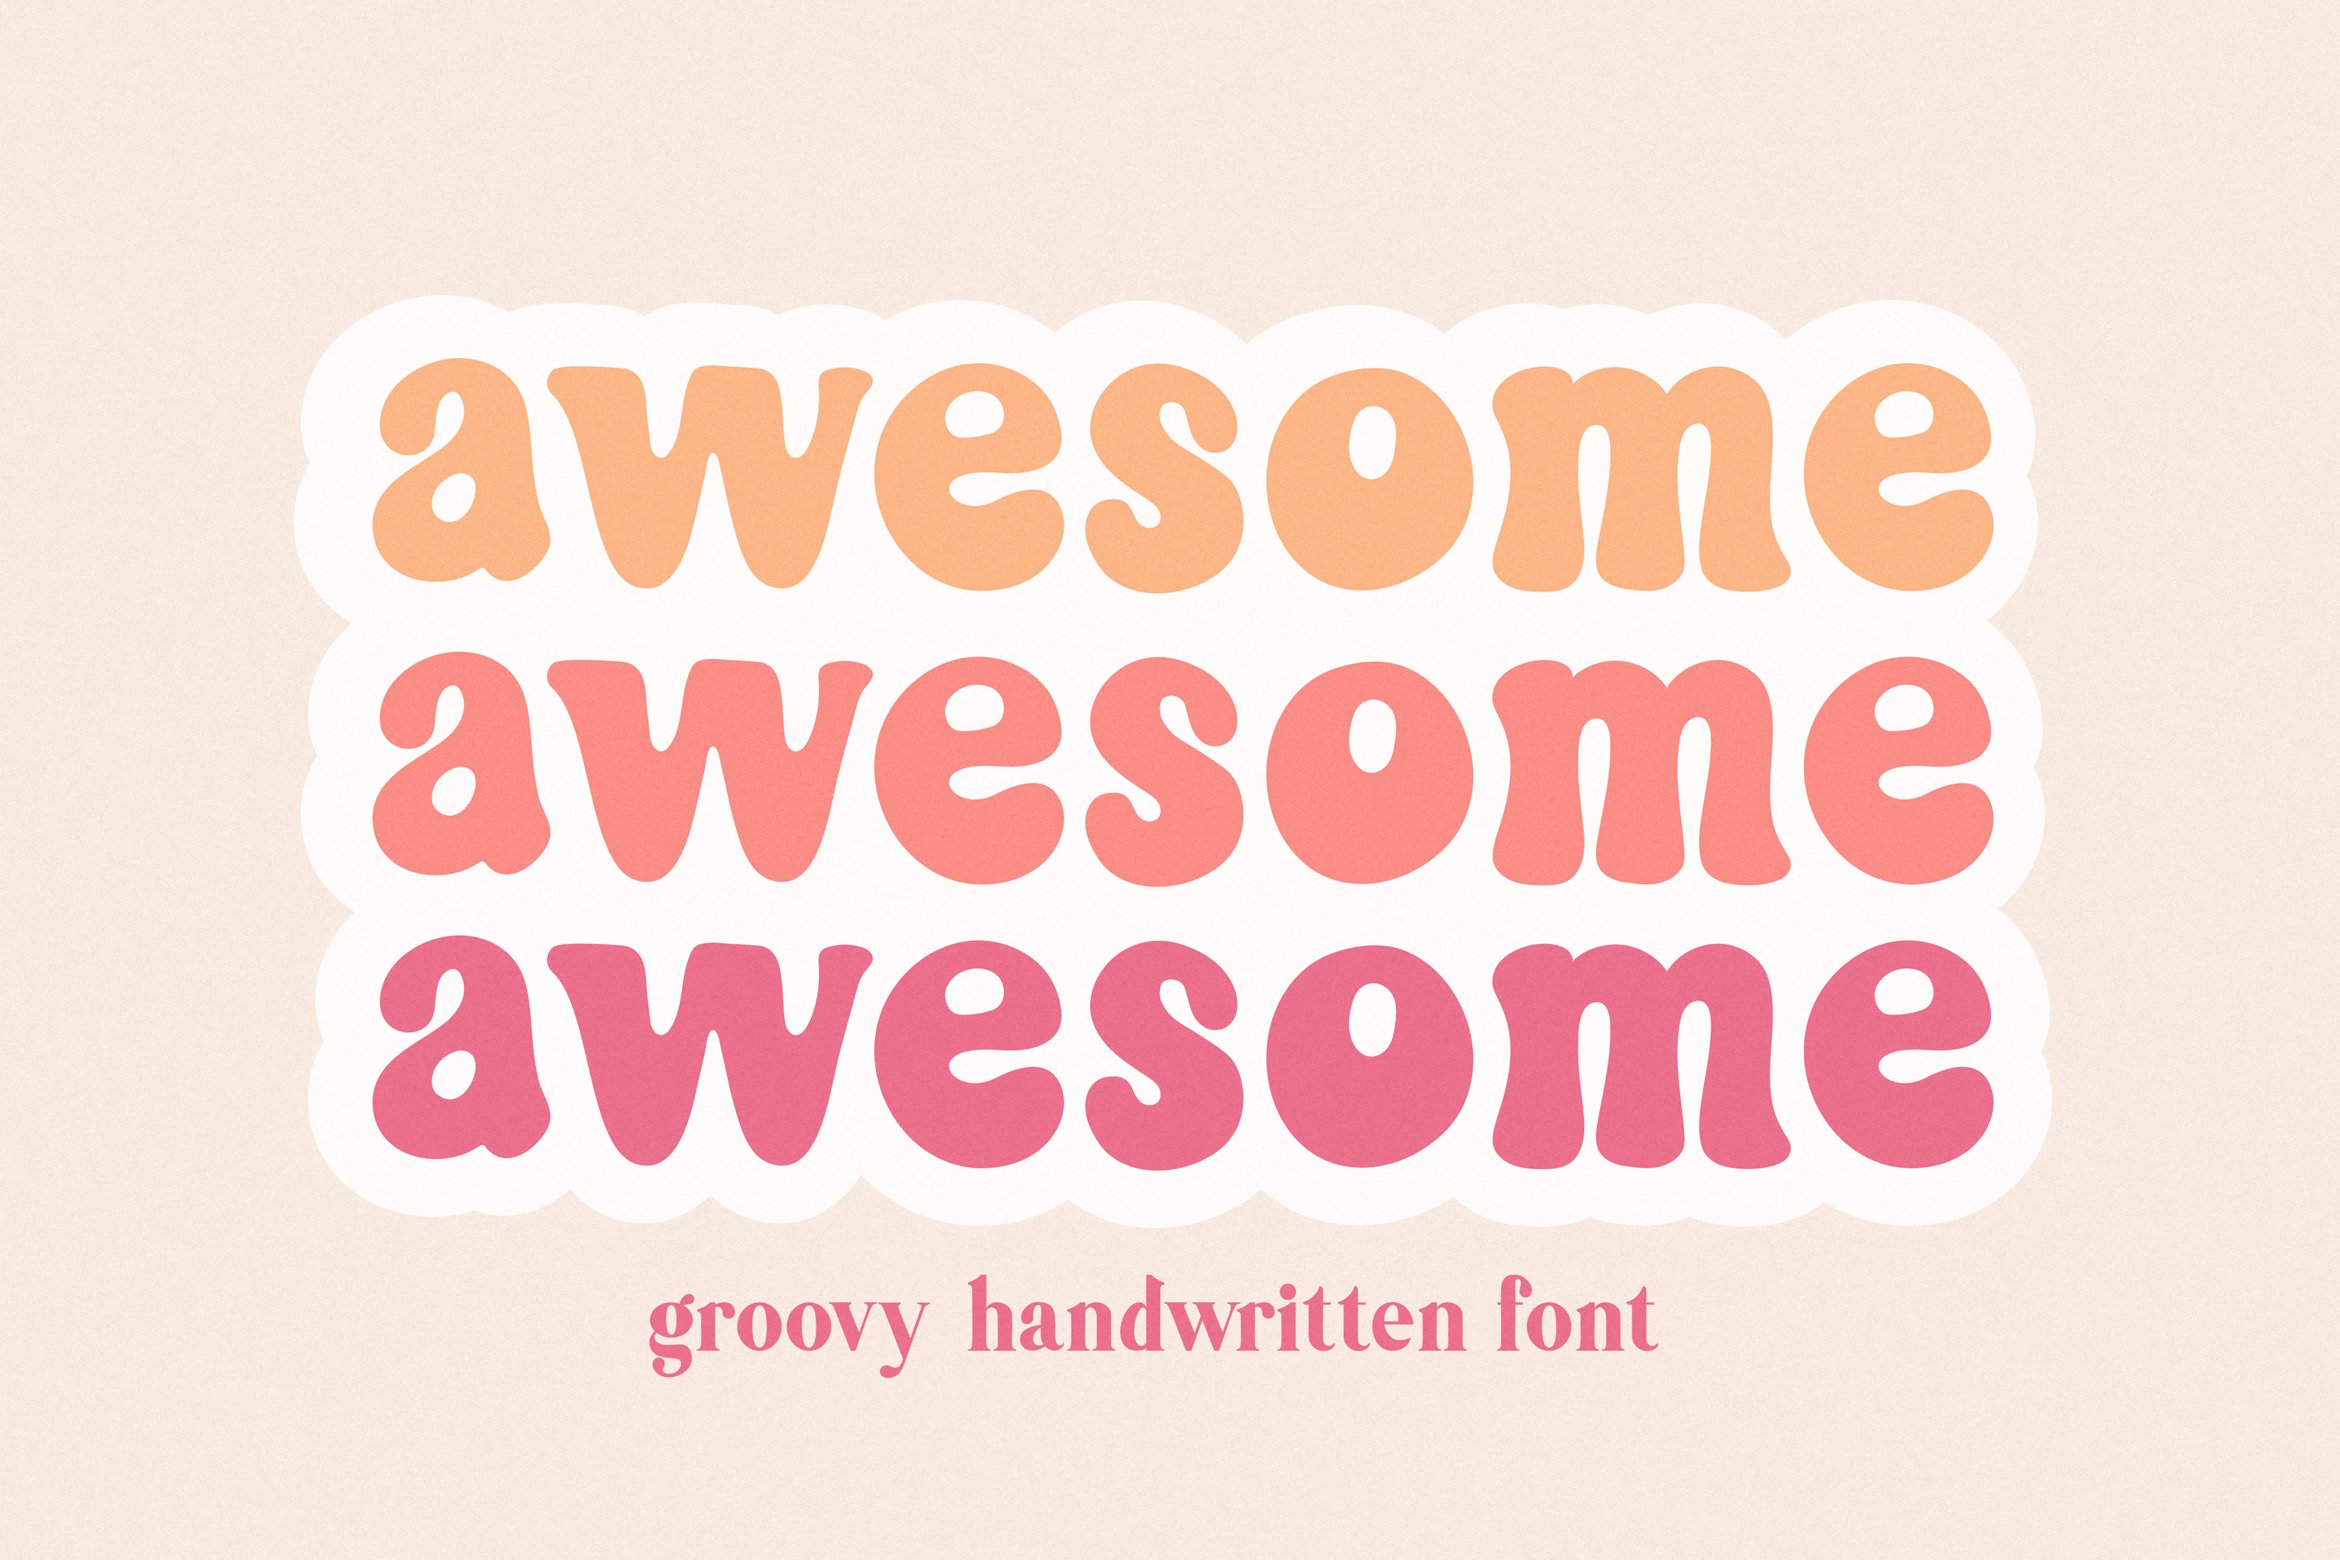 Awesome - Groovy Font for Crafters cover image.